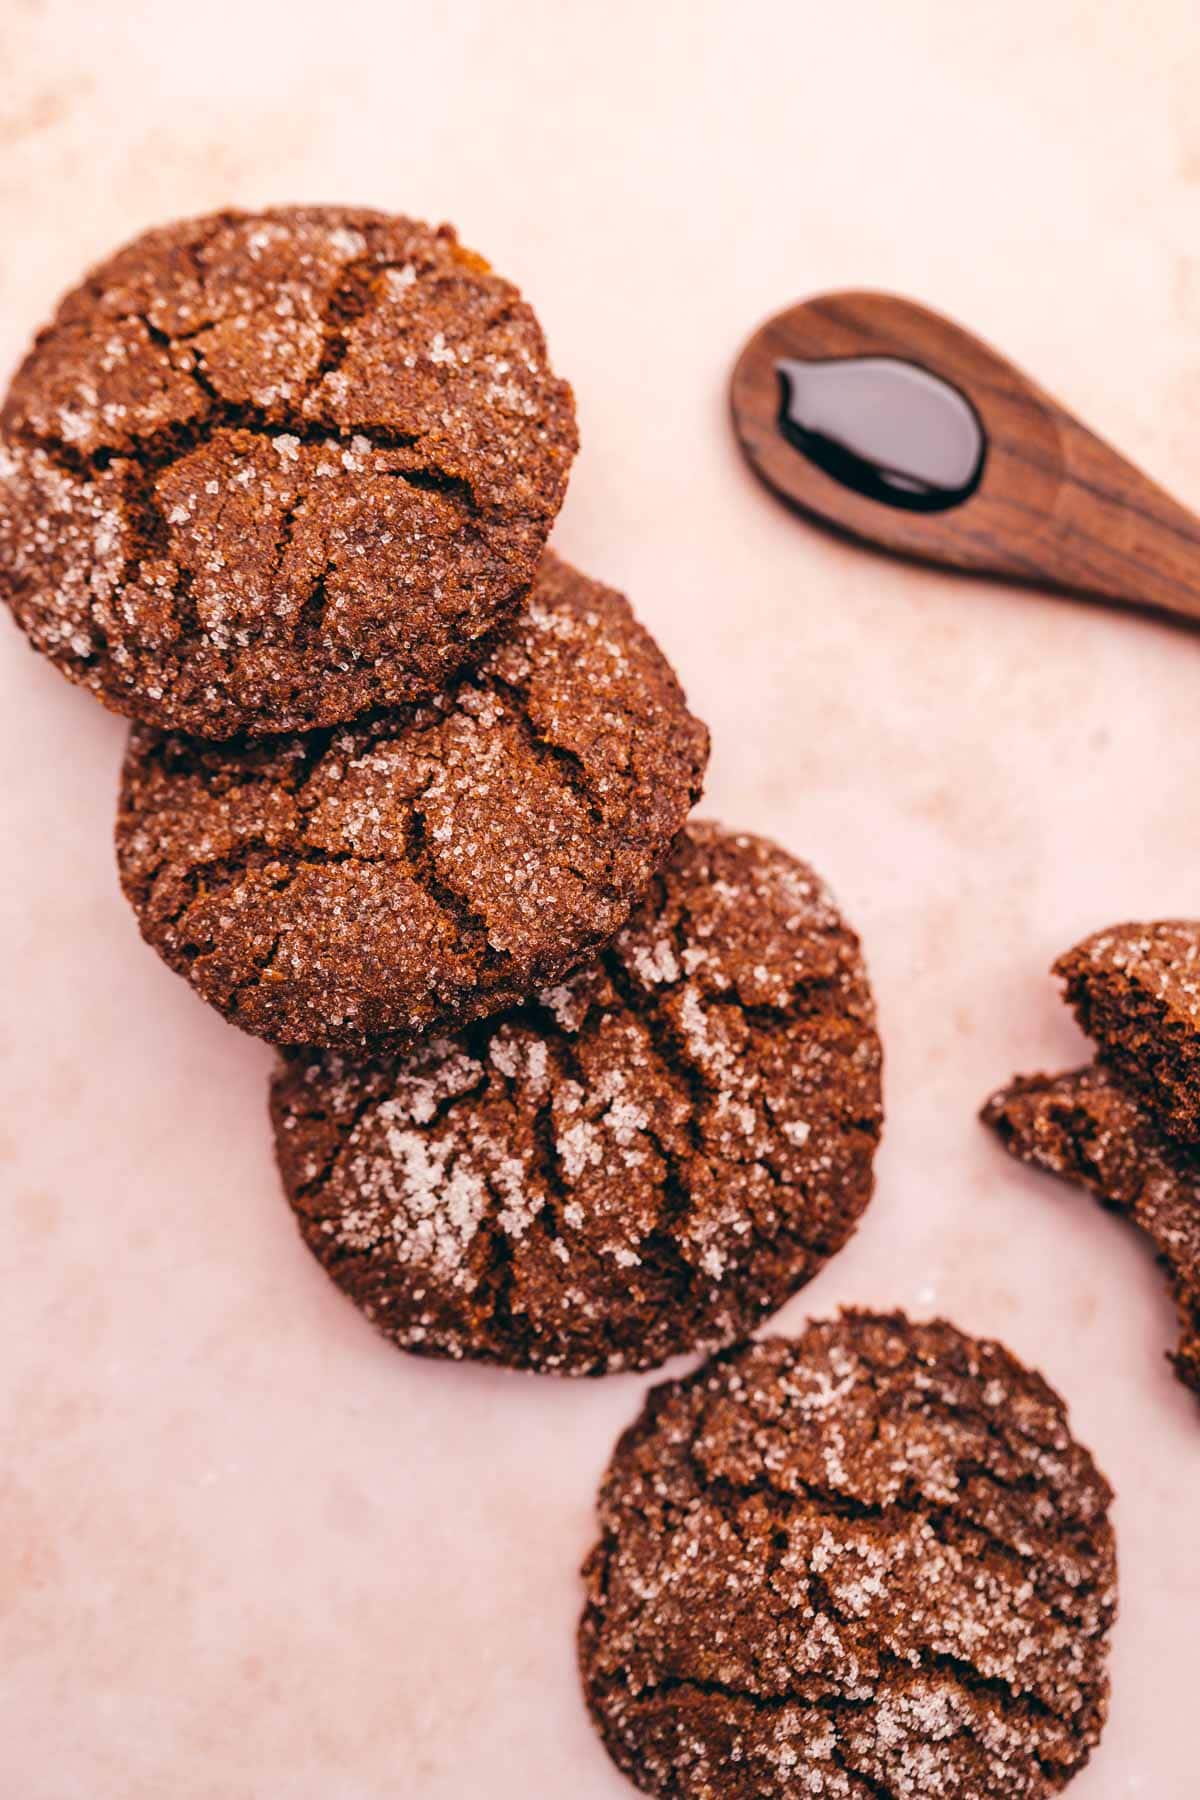 A group of gluten free ginger molasses cookies with a spoon on a table.